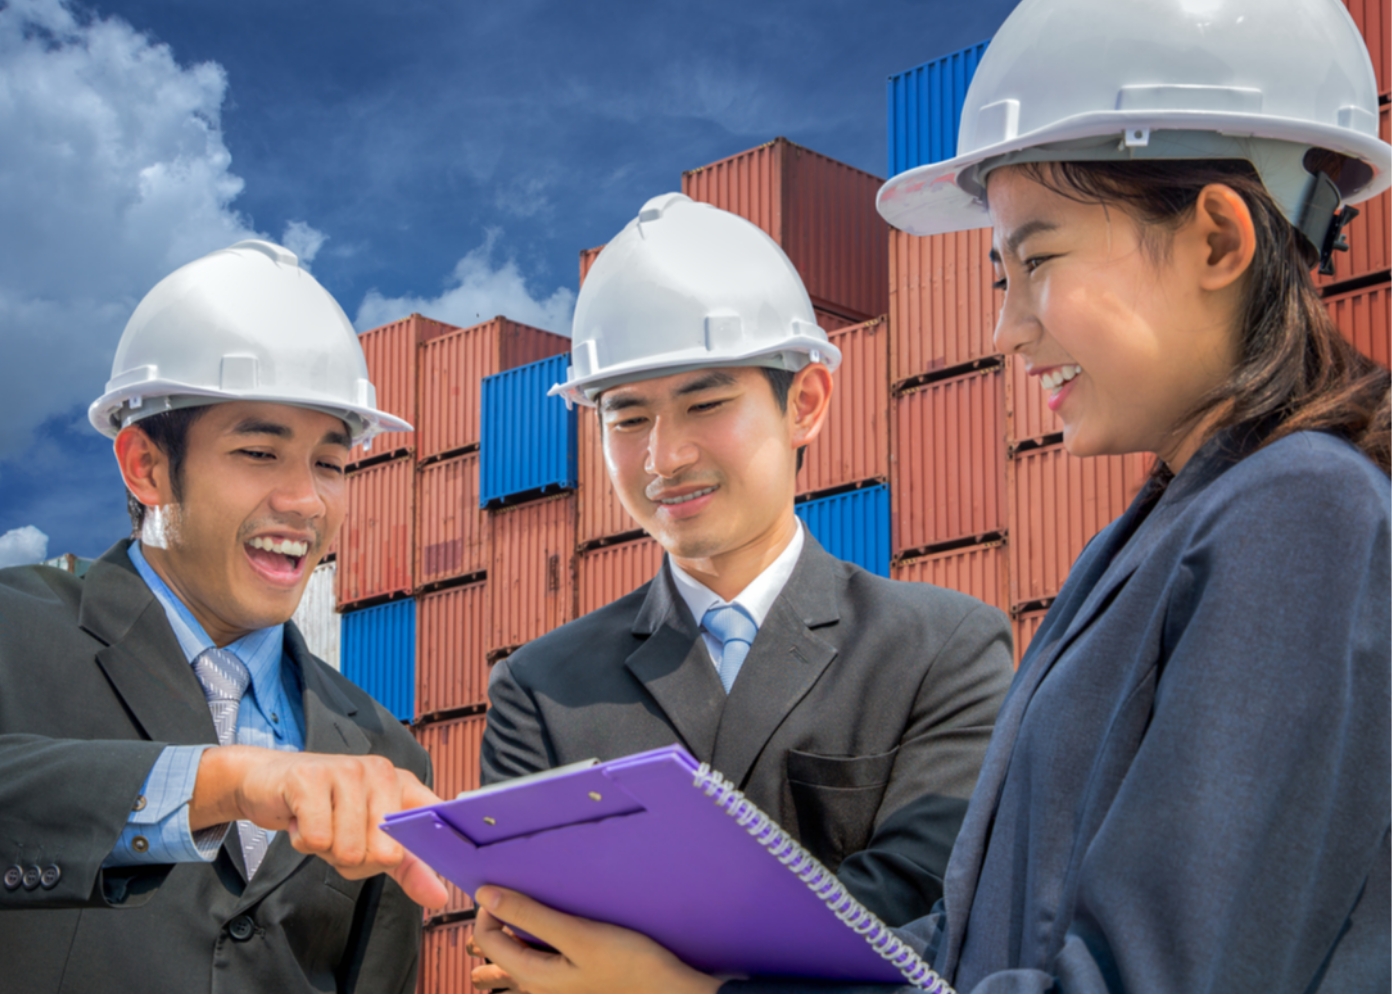 Building logistics services tailored to your needs